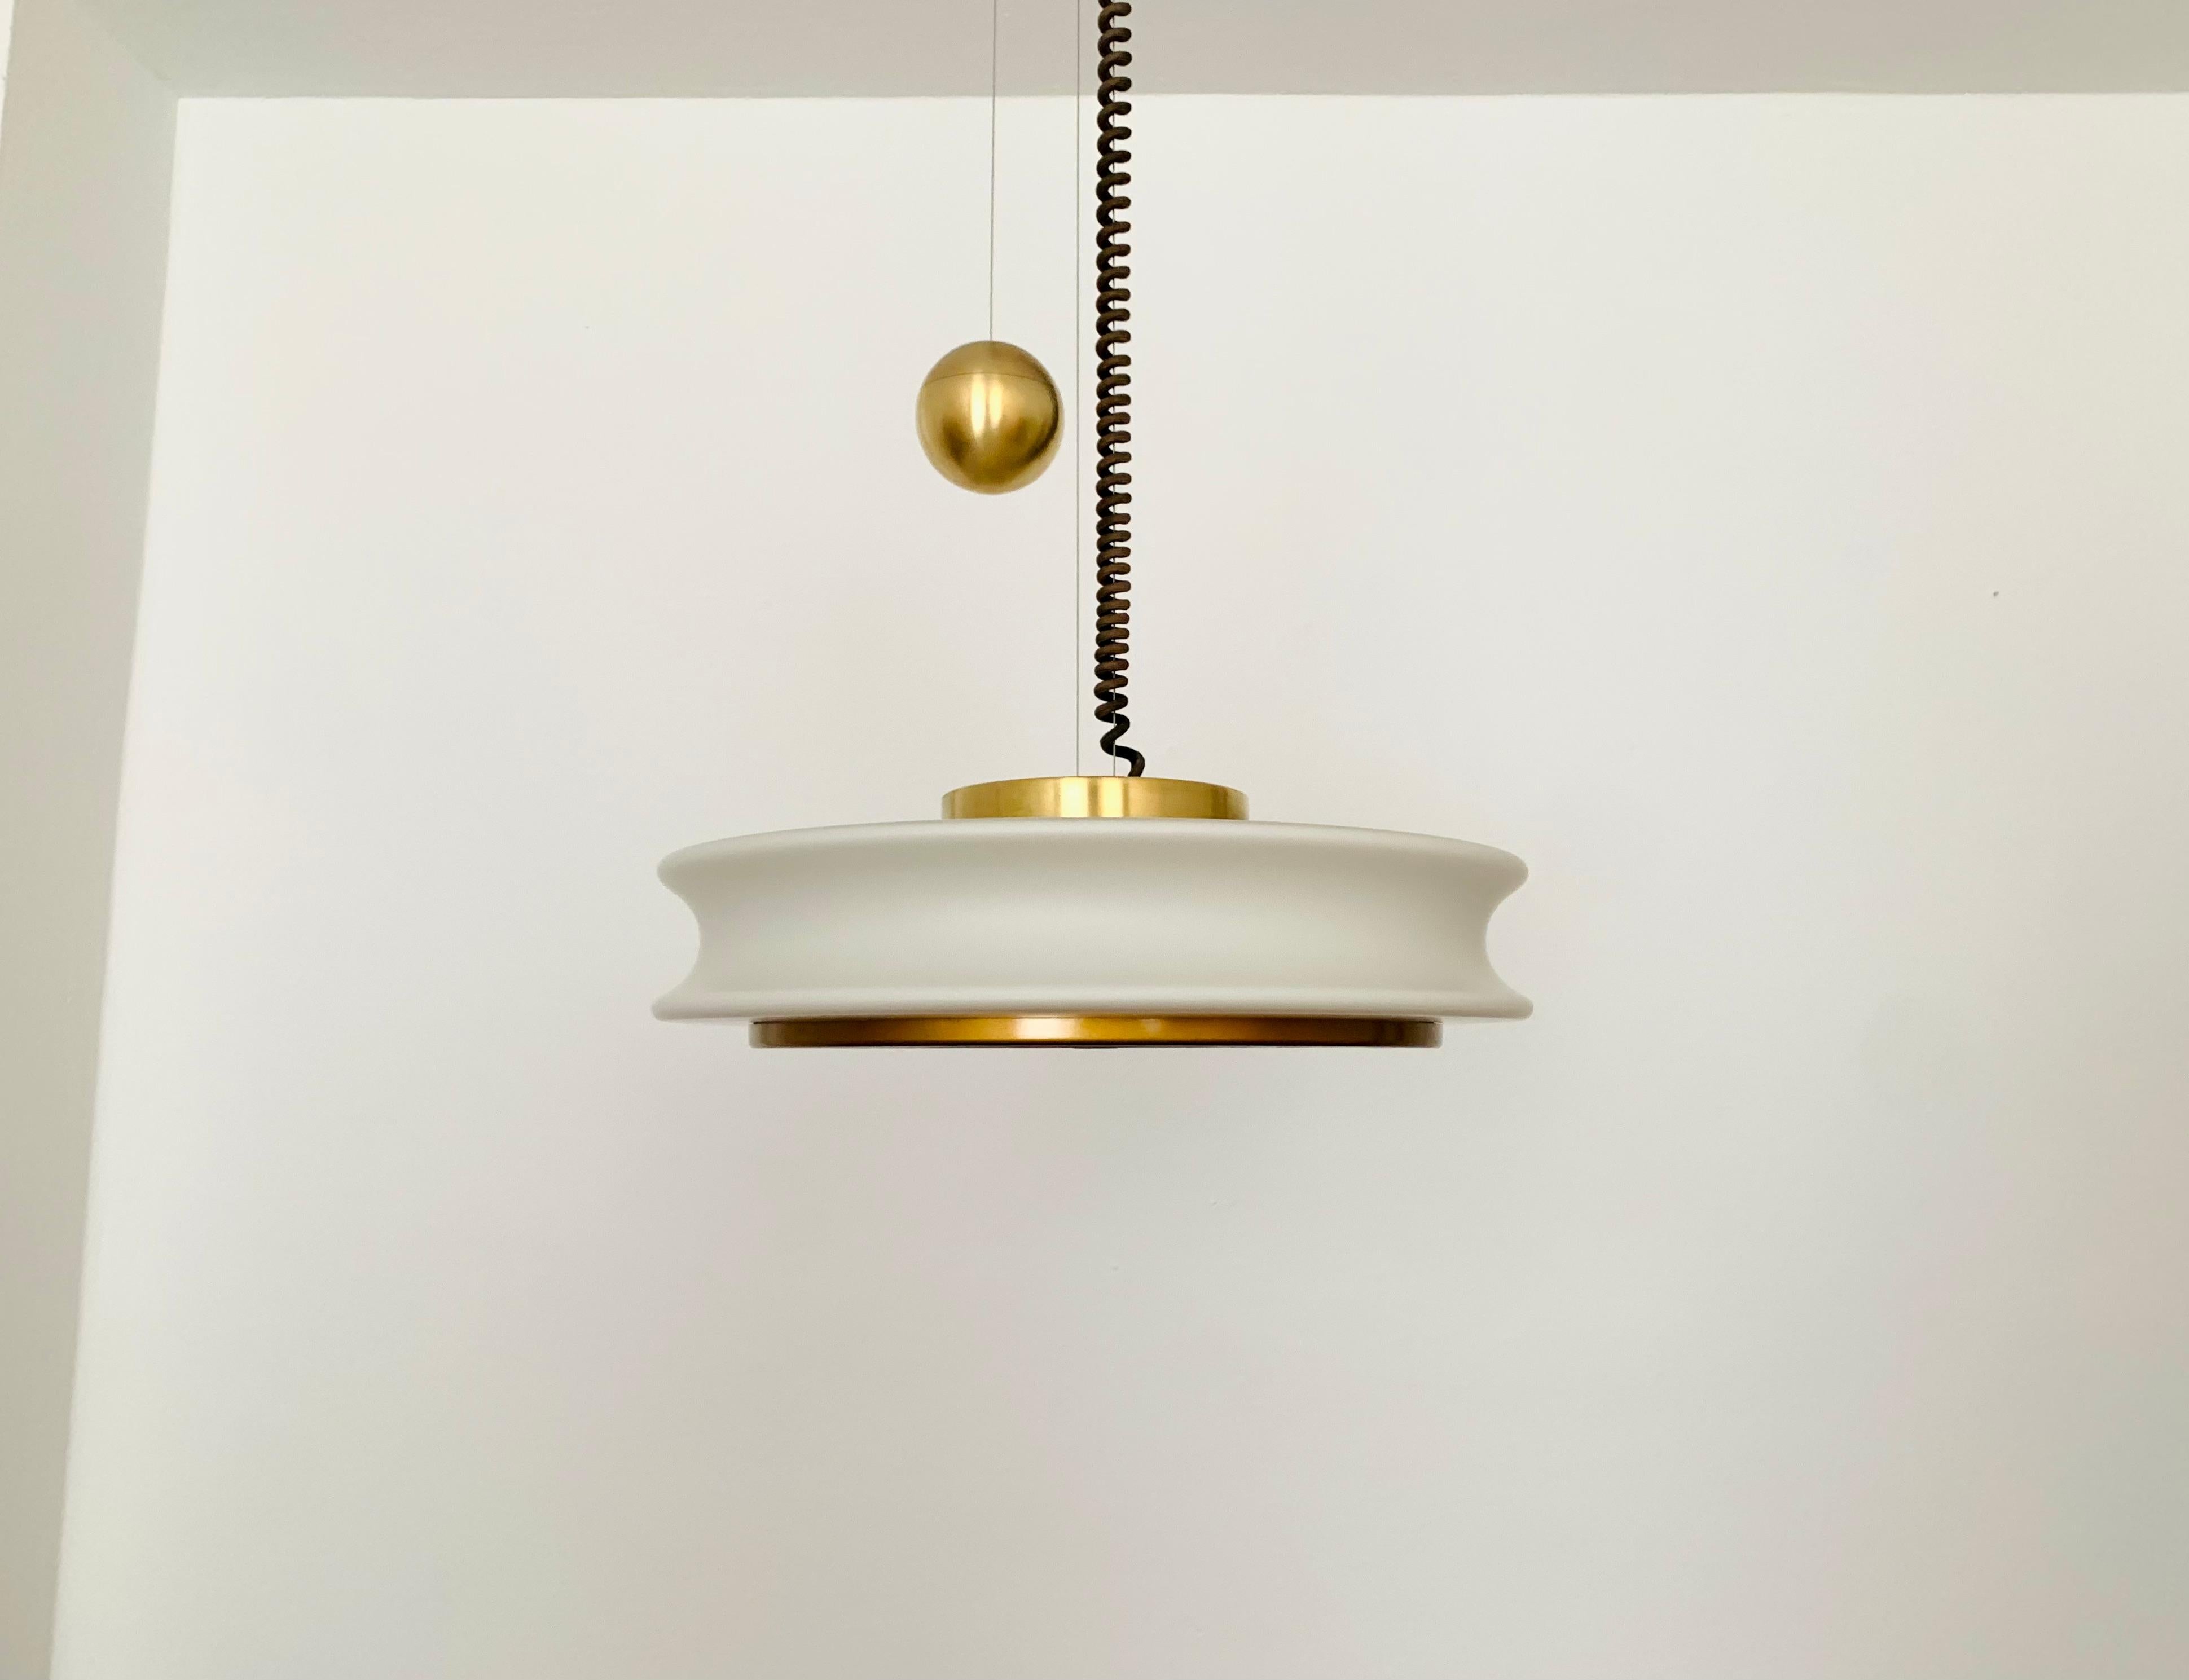 Extremely impressive Orion pendant lamp from the 1960s.
Extraordinary design and a real highlight for every design lover.
The lighting effect of the lamp is extremely comfortable.
The frosted opal glass is particularly beautiful.
Very high